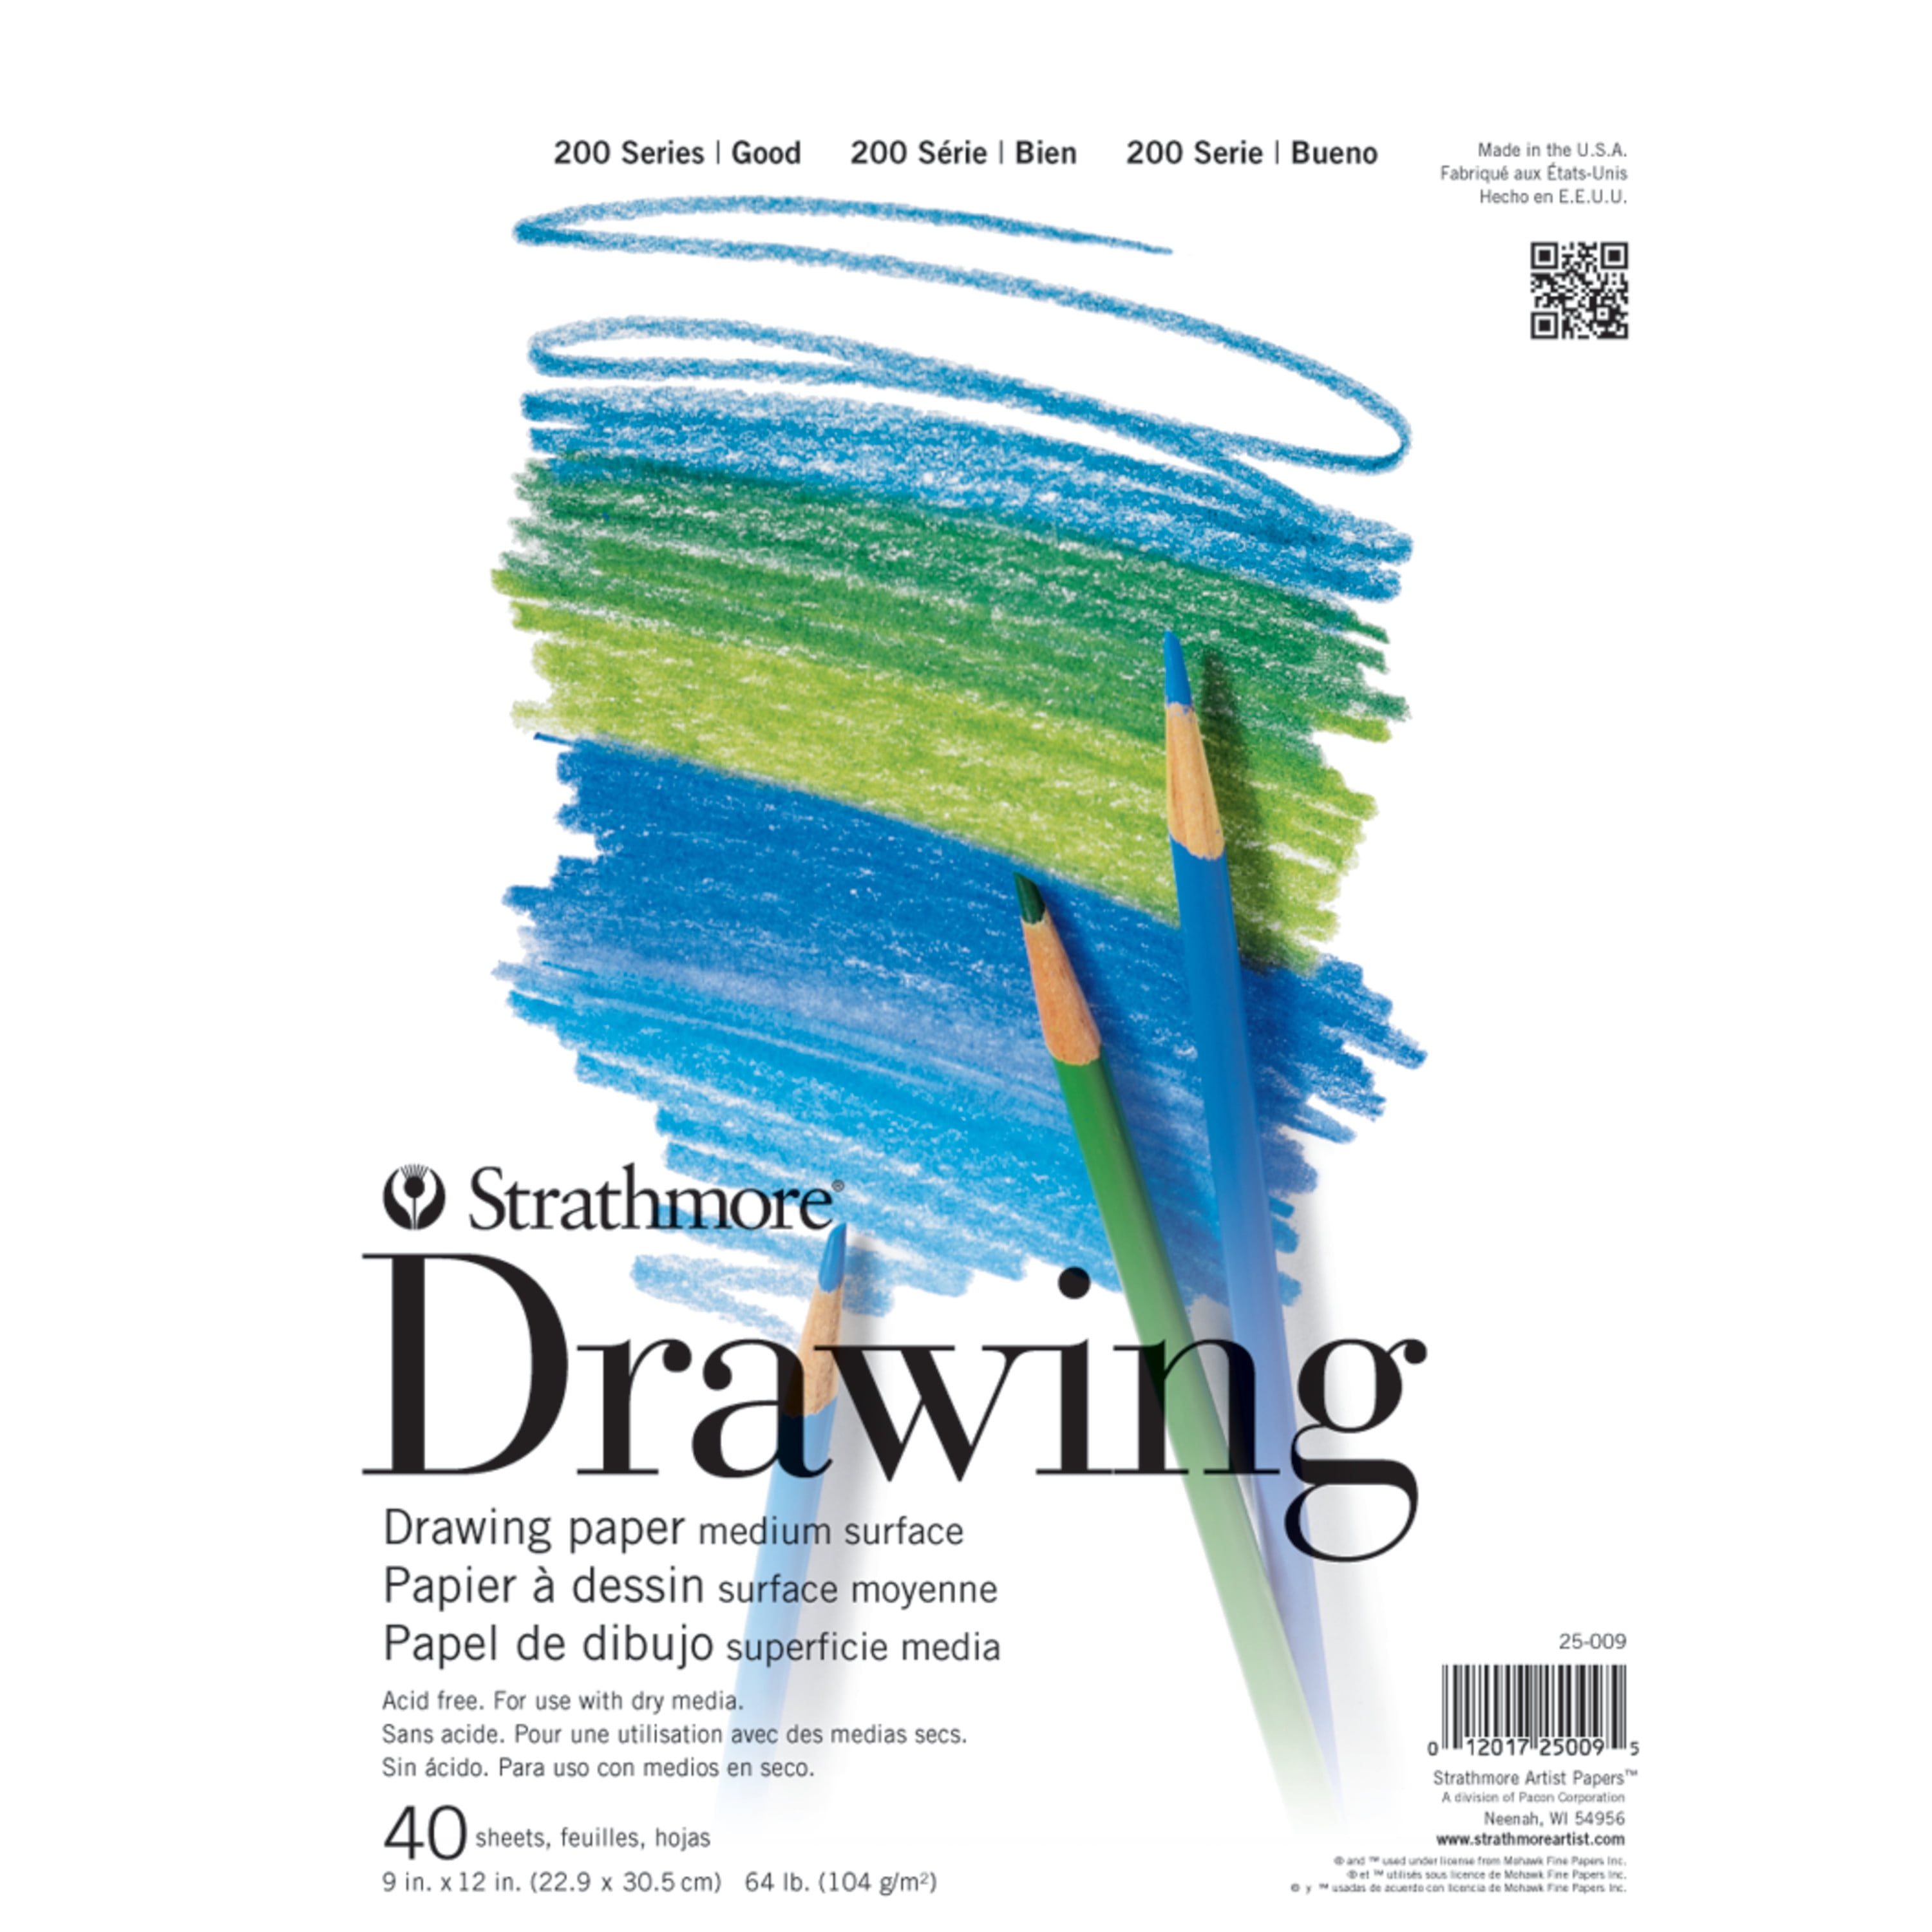 Strathmore Drawing Paper Pad, 200 Series, 5.5" x 8.5"